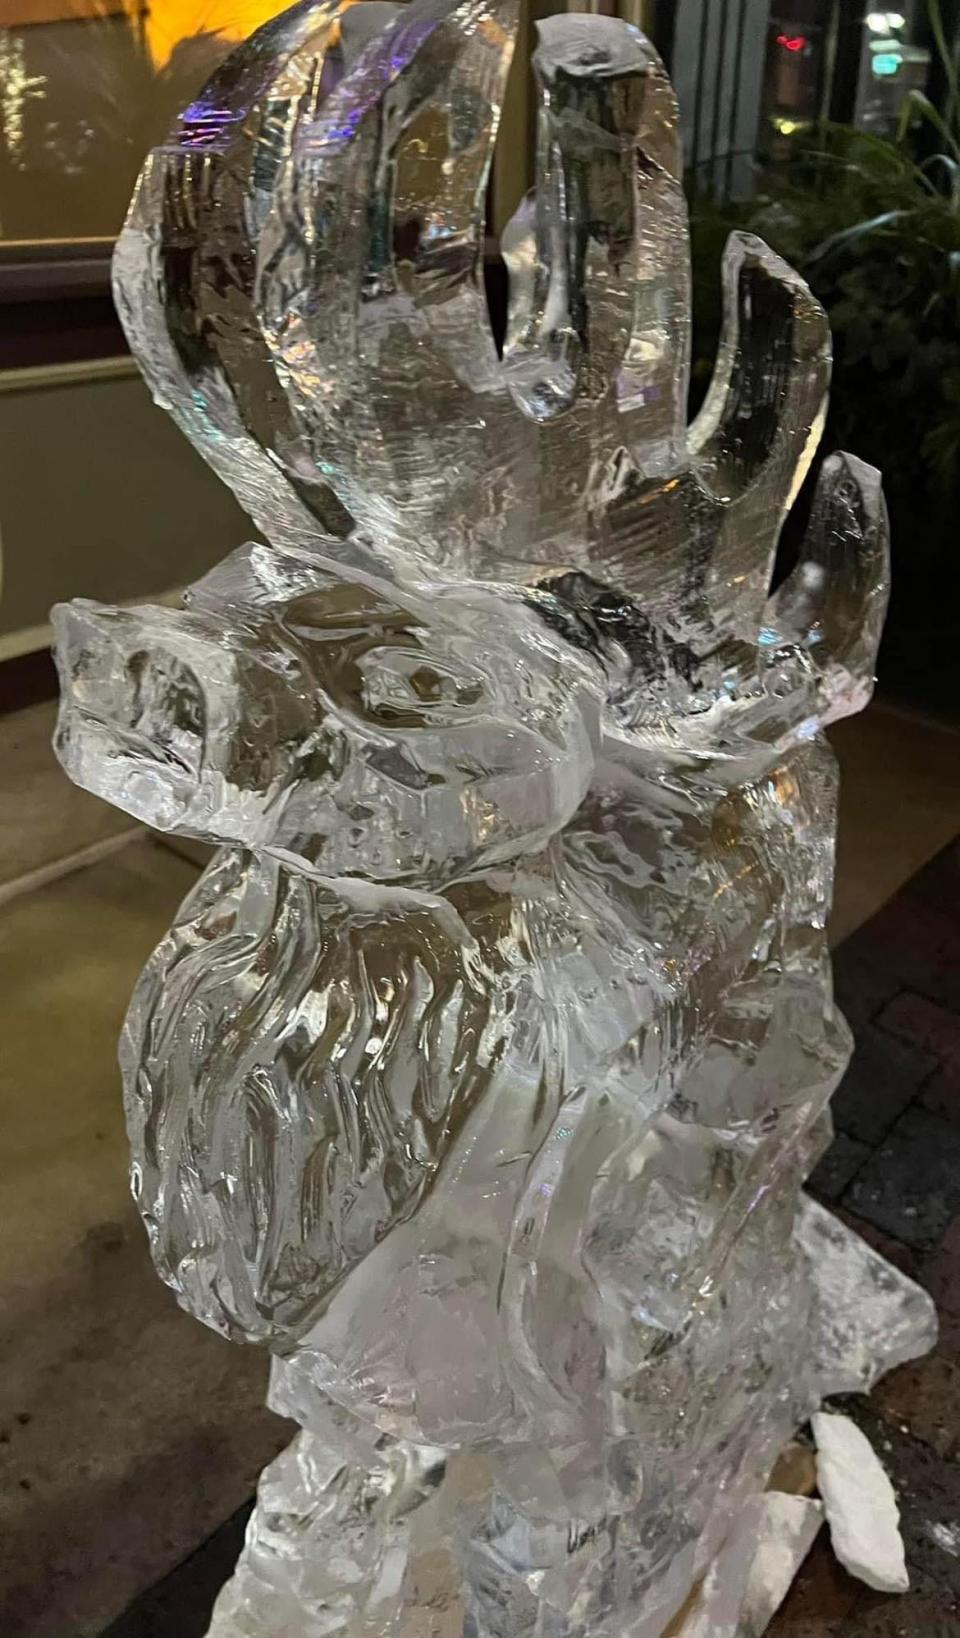 Ice sculpting will be part of the Jan. 6 First Friday event in downtown Canton. Sculpting will be performed outside businesses and shops at 20 locations.